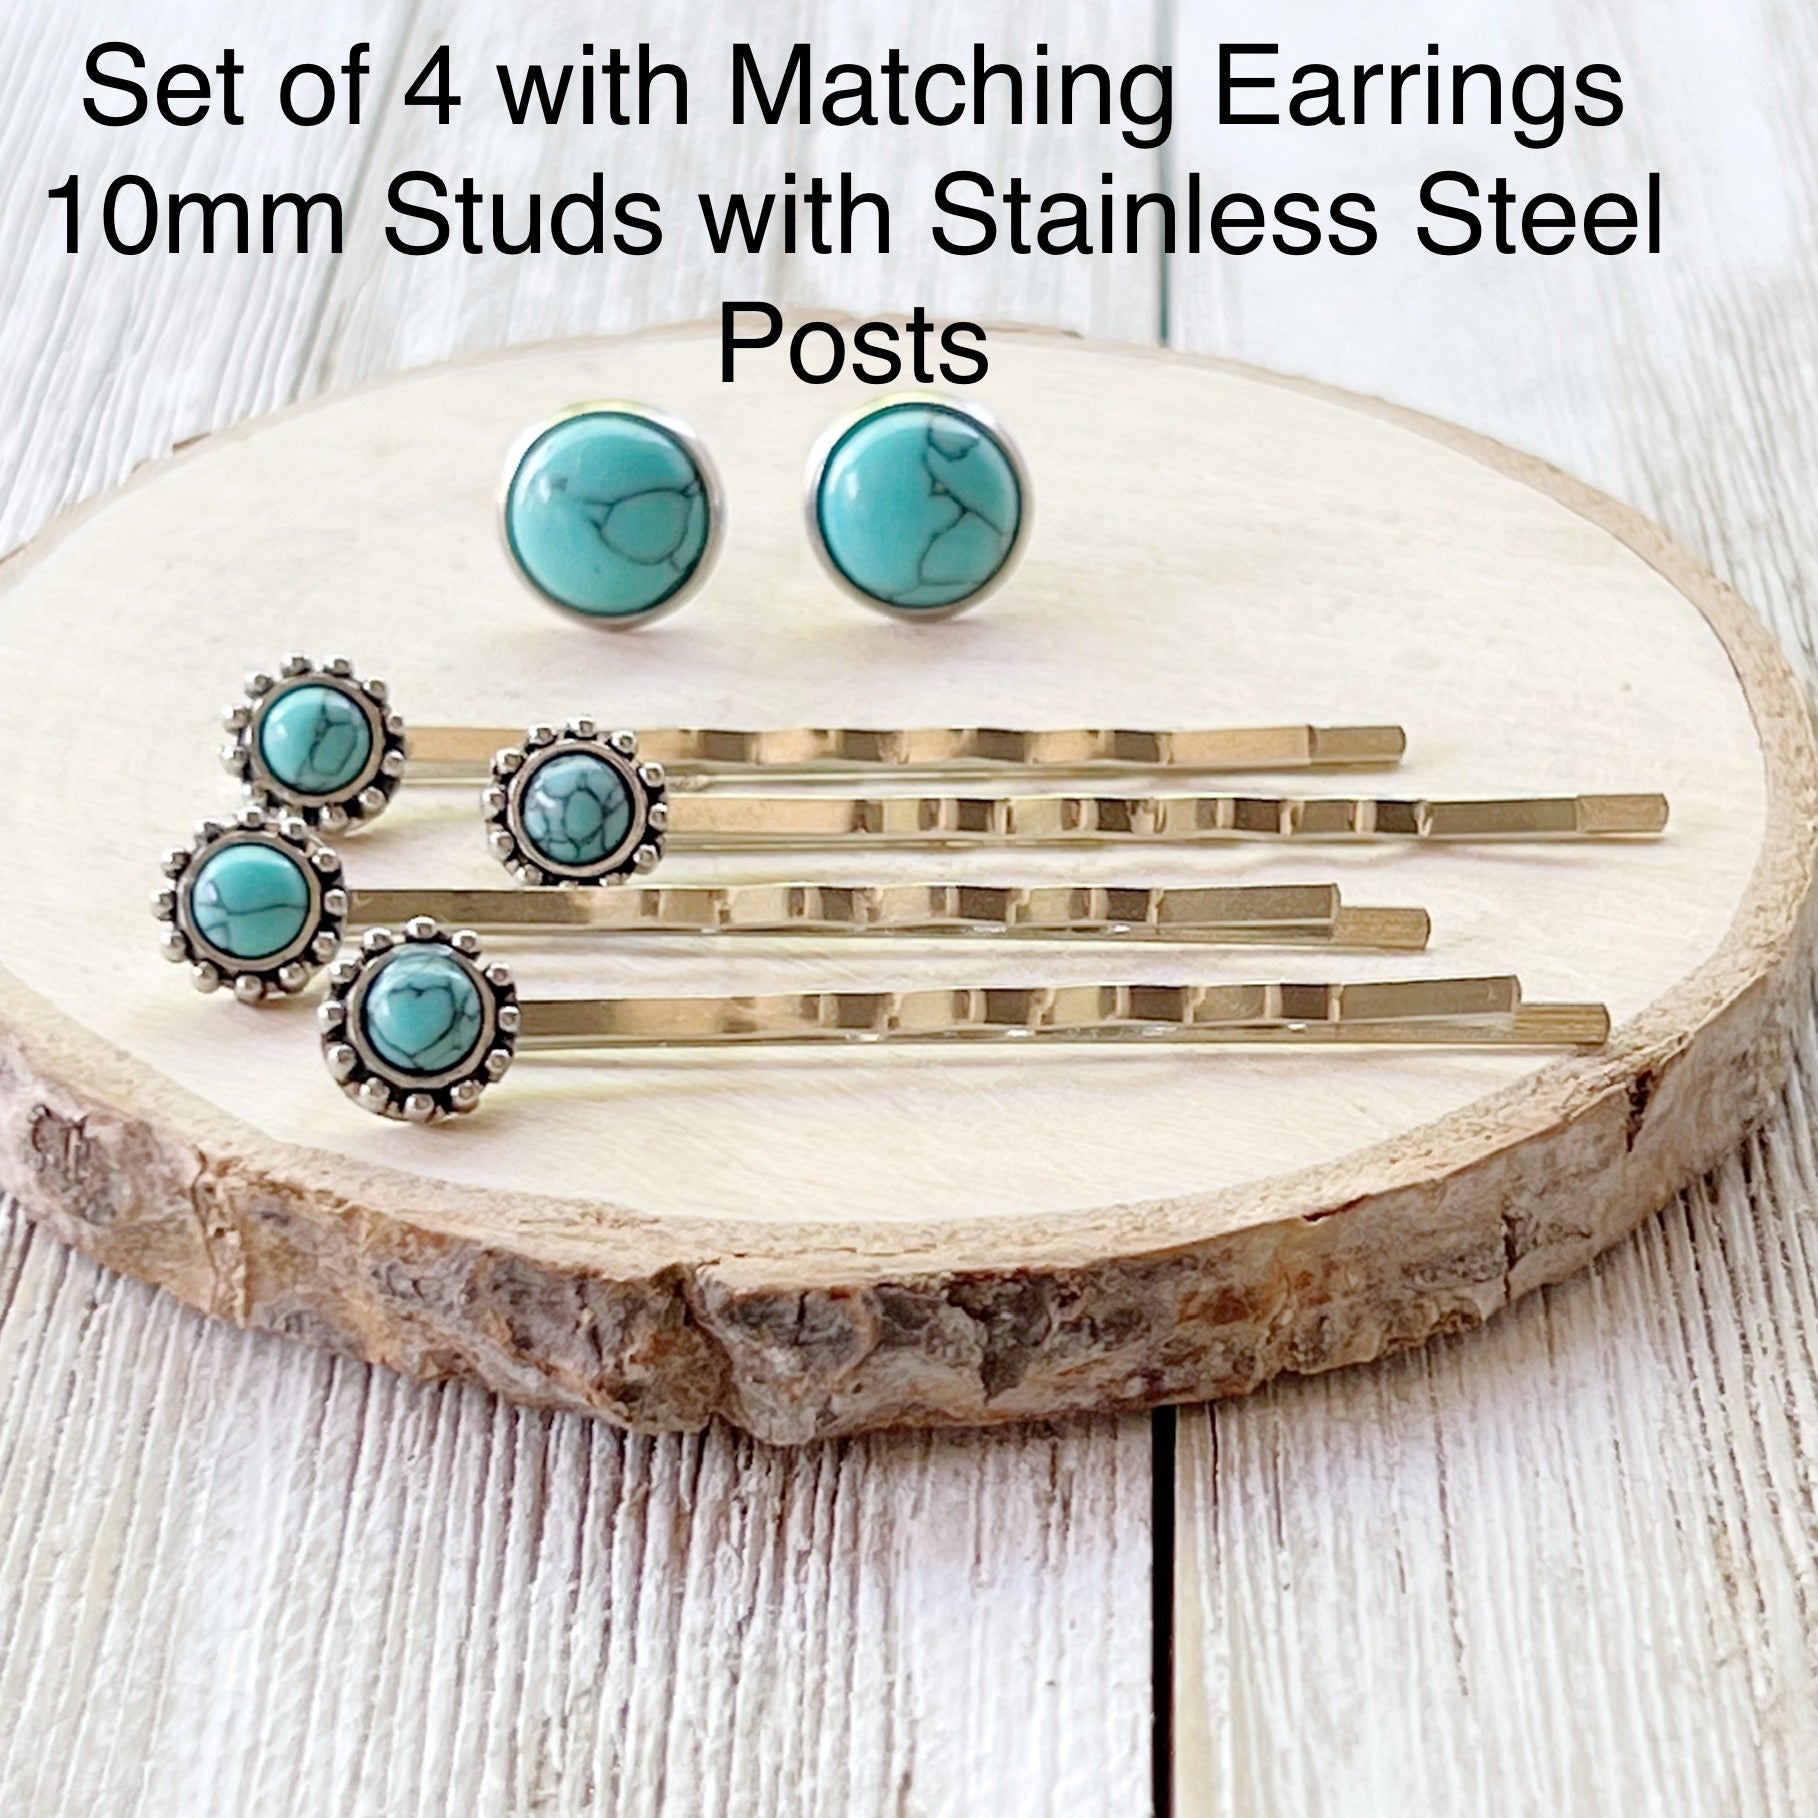 Women's Western Turquoise Hair Pins with Matching 10mm Earrings - Stylish Set for Western-inspired Looks